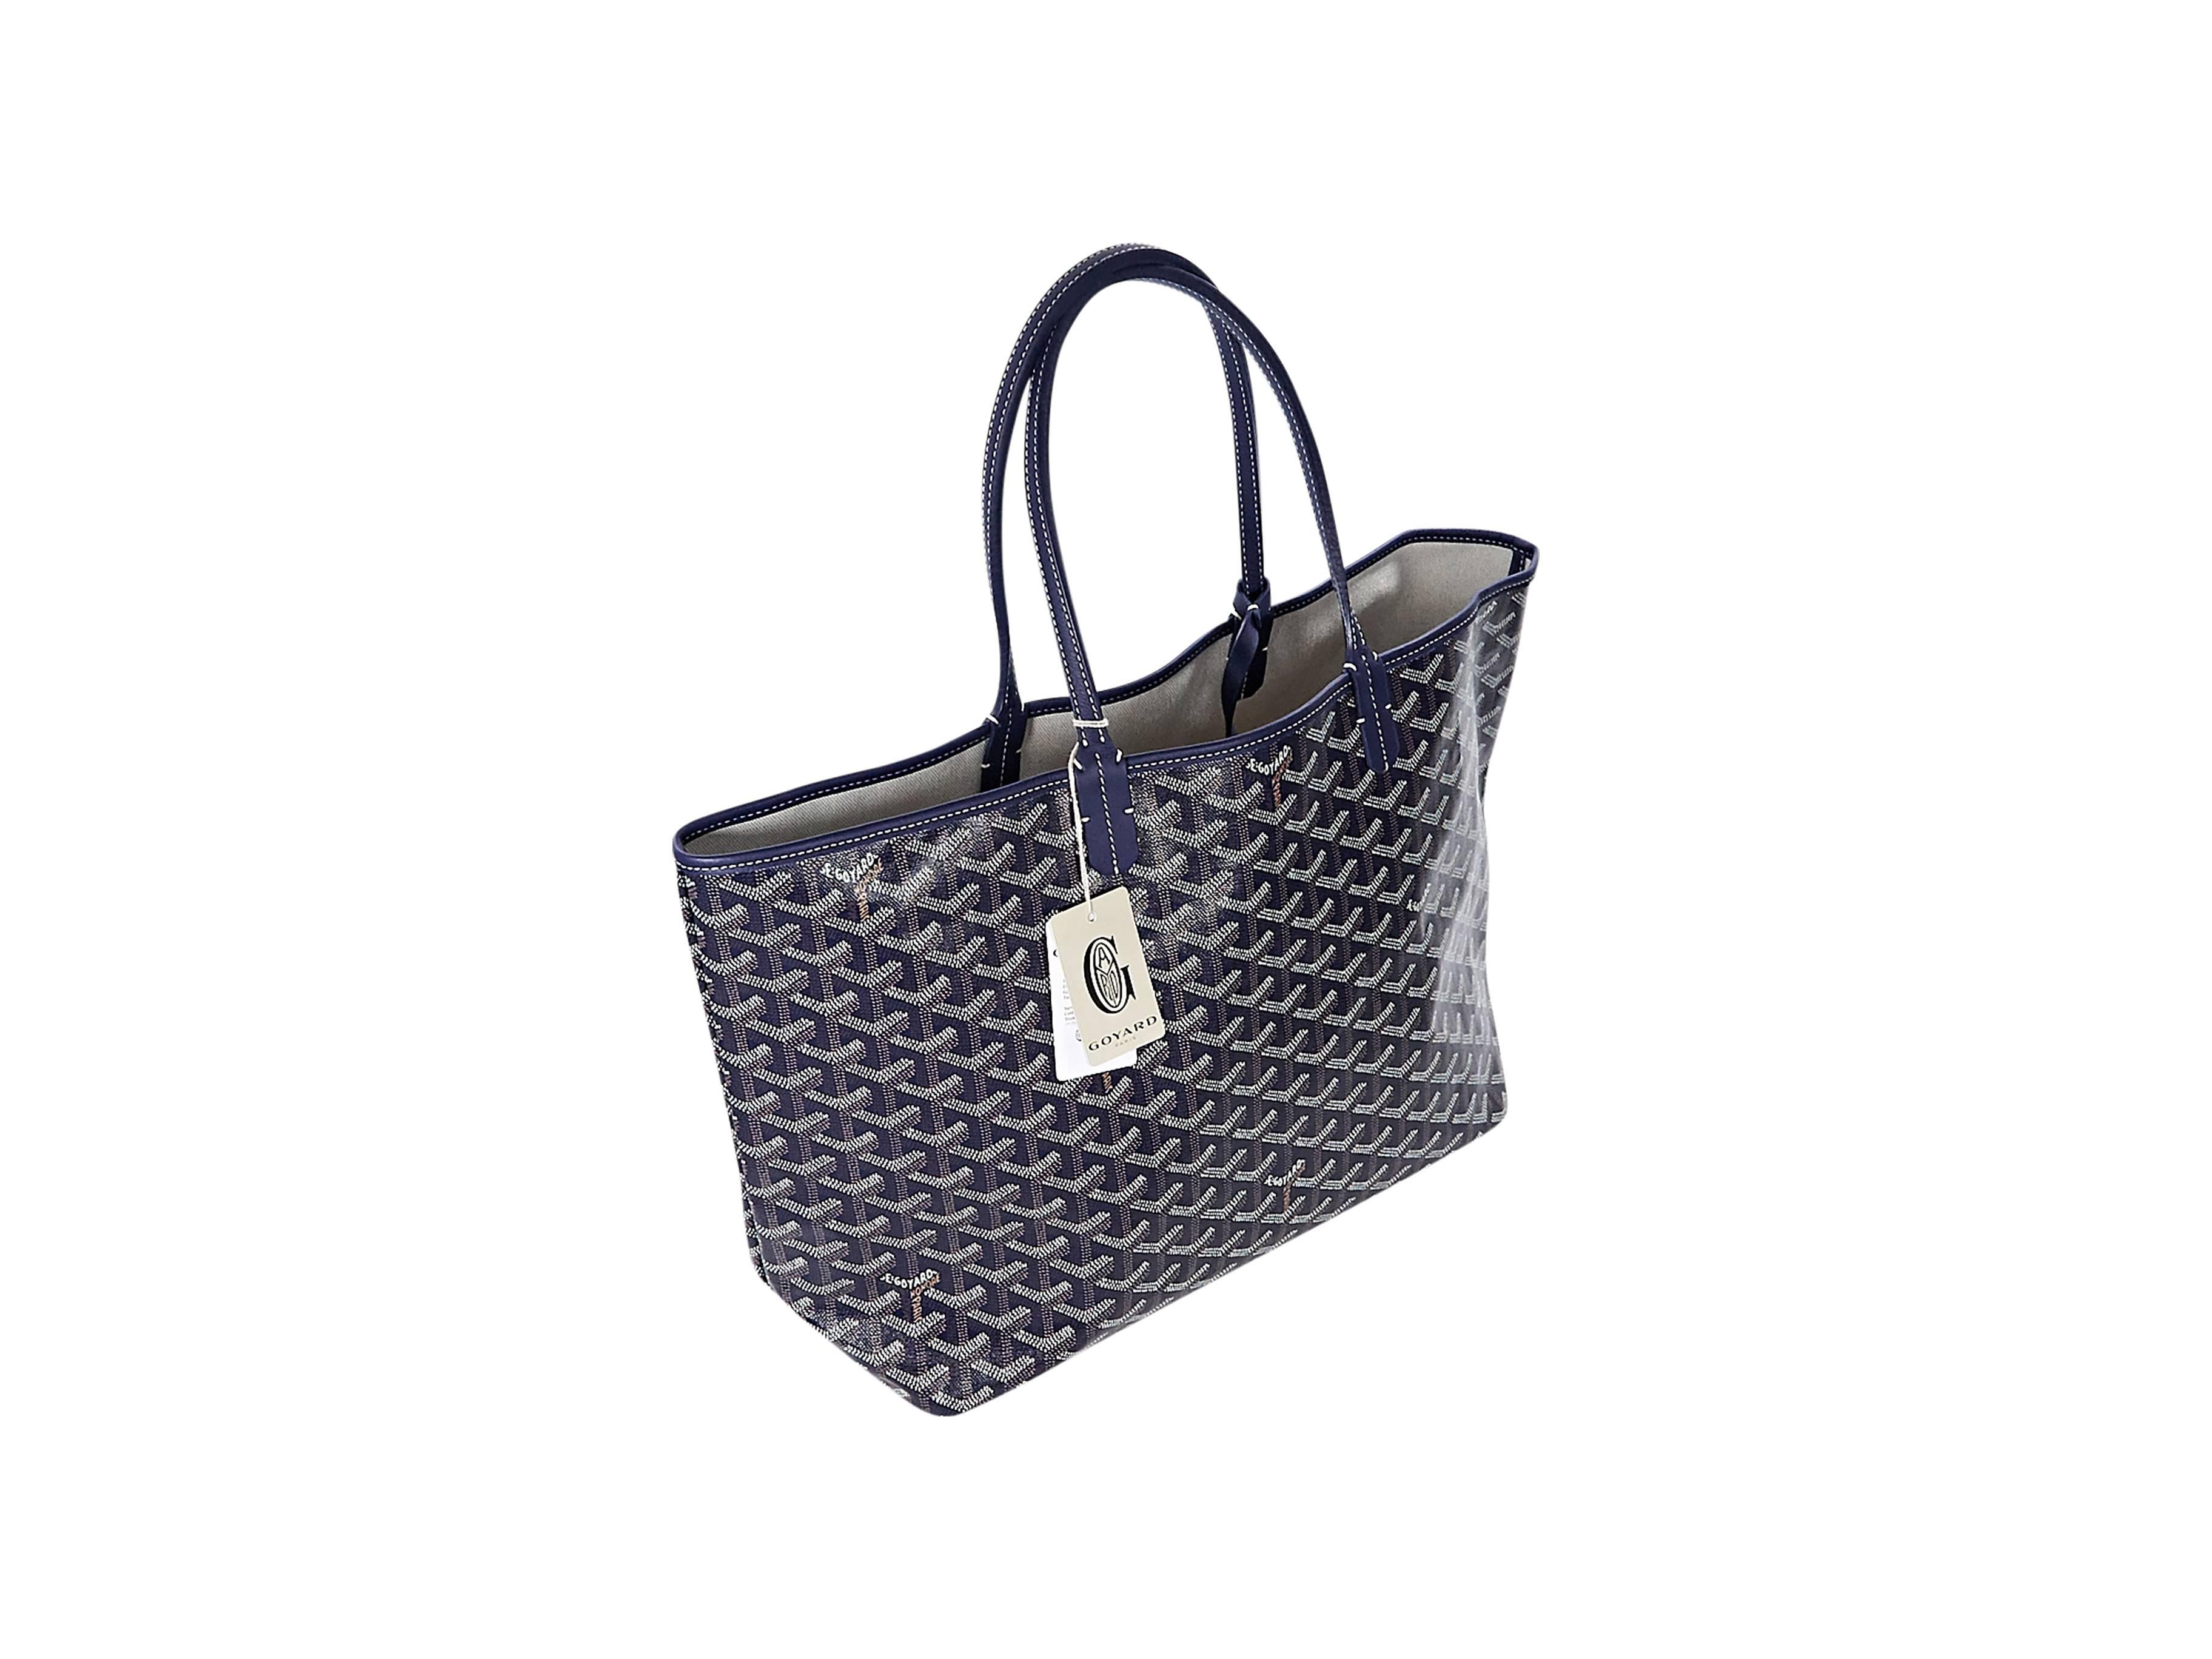 Product details:  Navy blue St. Louis tote bag by Goyard.  Trimmed with leather.  Dual carry handles.  Open top.  Lined interior.  Matching inner pouch.  Includes original cards and dustbag. 10